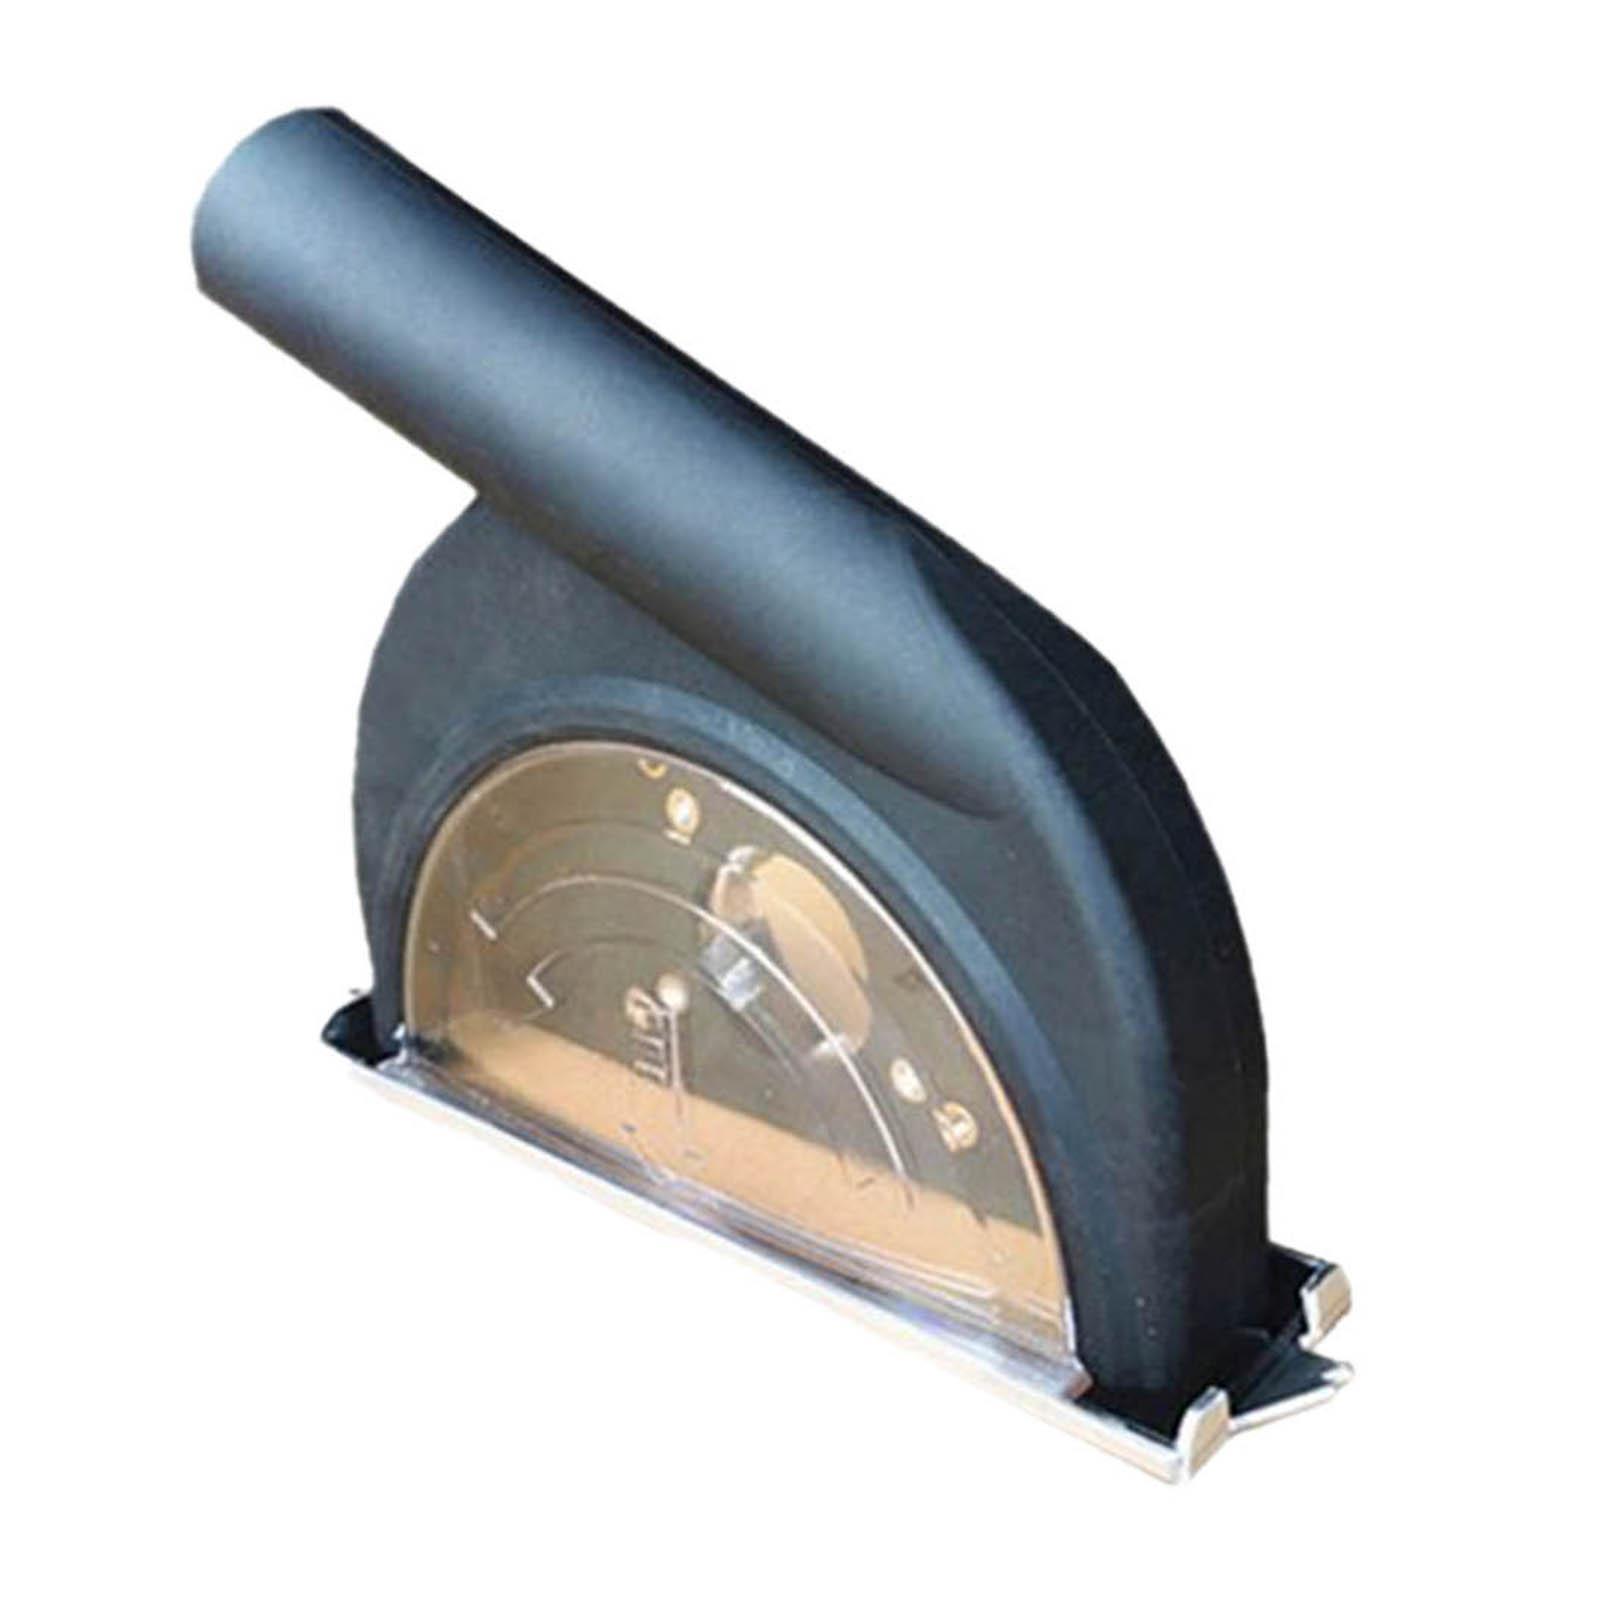 Shroud Dust Cover for Angle Grinder Collector Surface Grinding Plastic